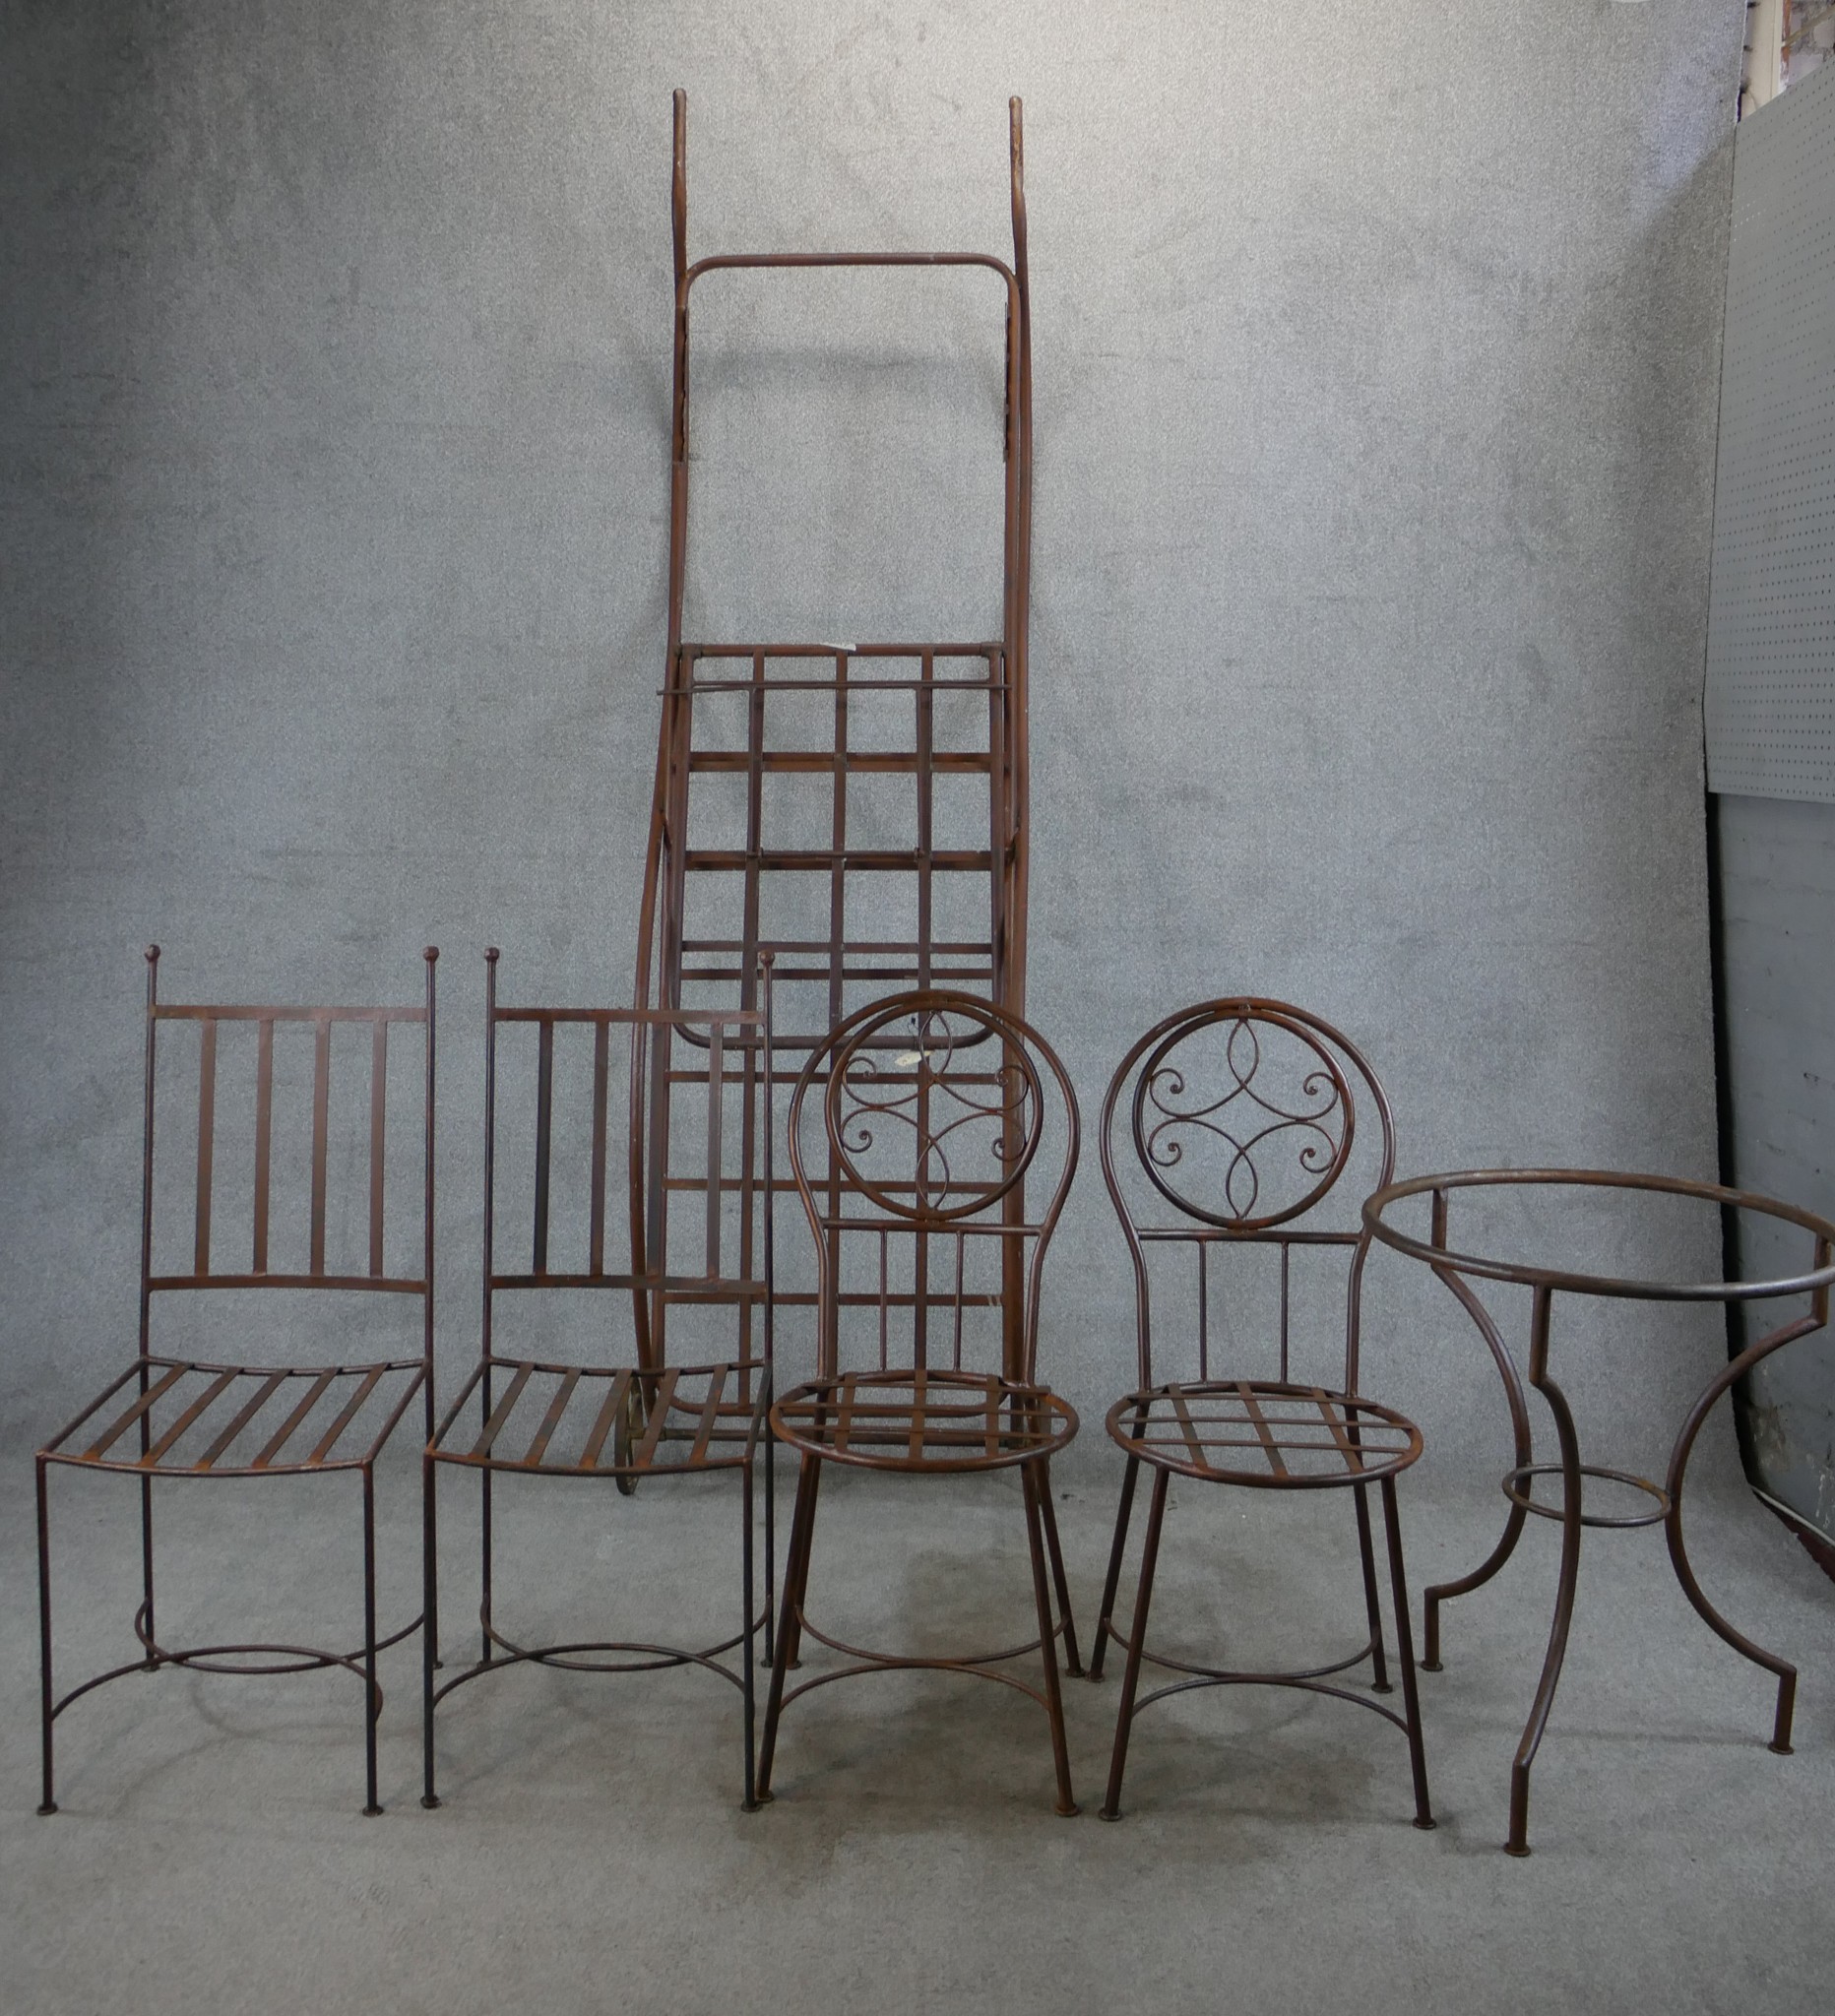 Two pairs of wrought iron garden chairs, together with a wrought iron garden table and a wrought